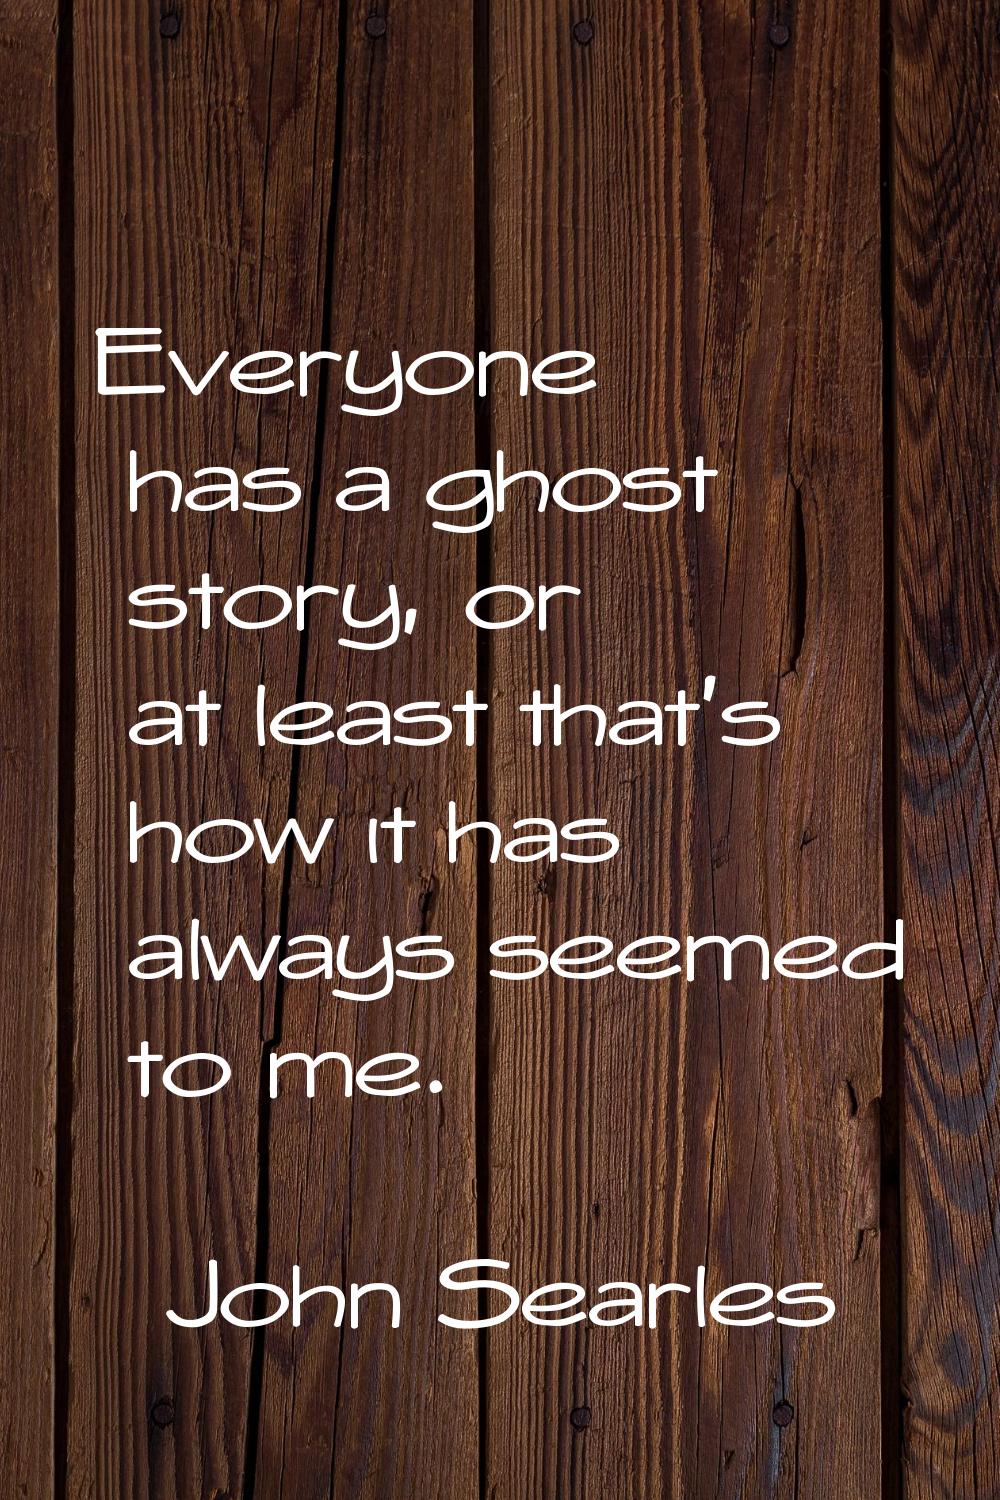 Everyone has a ghost story, or at least that's how it has always seemed to me.